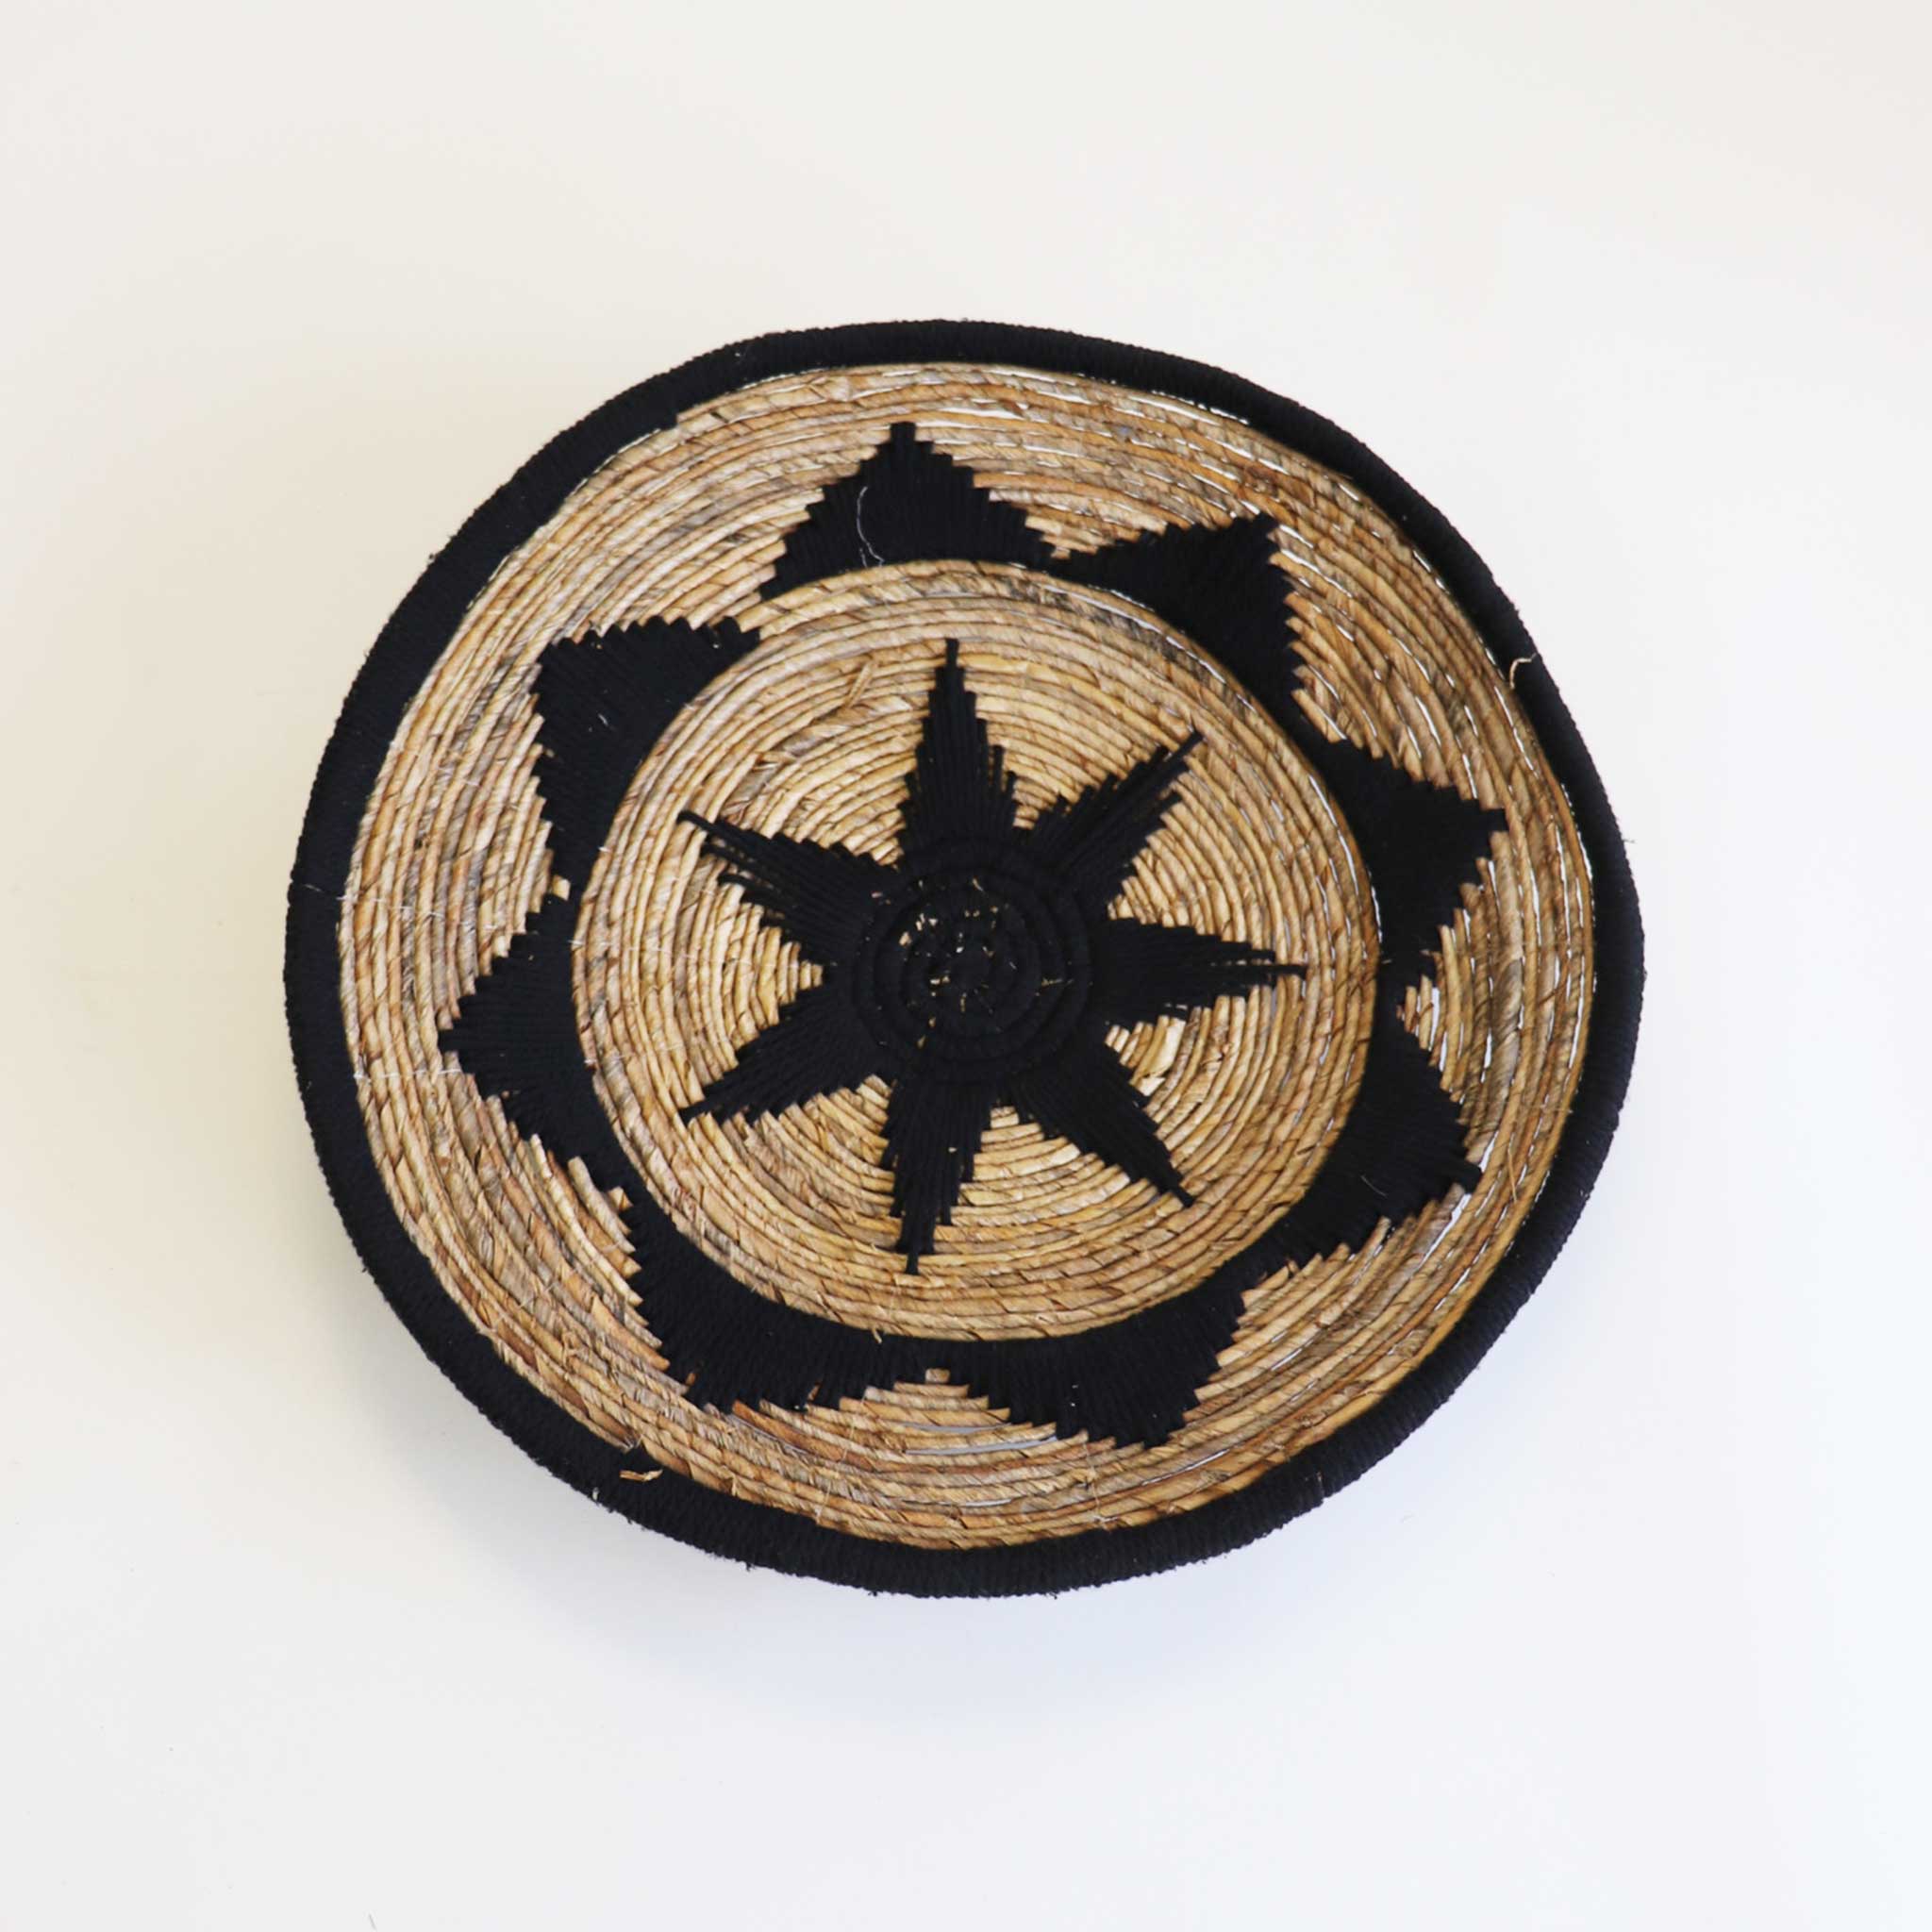 Decorative Black & Natural Rope Woven Wall Art/Plate